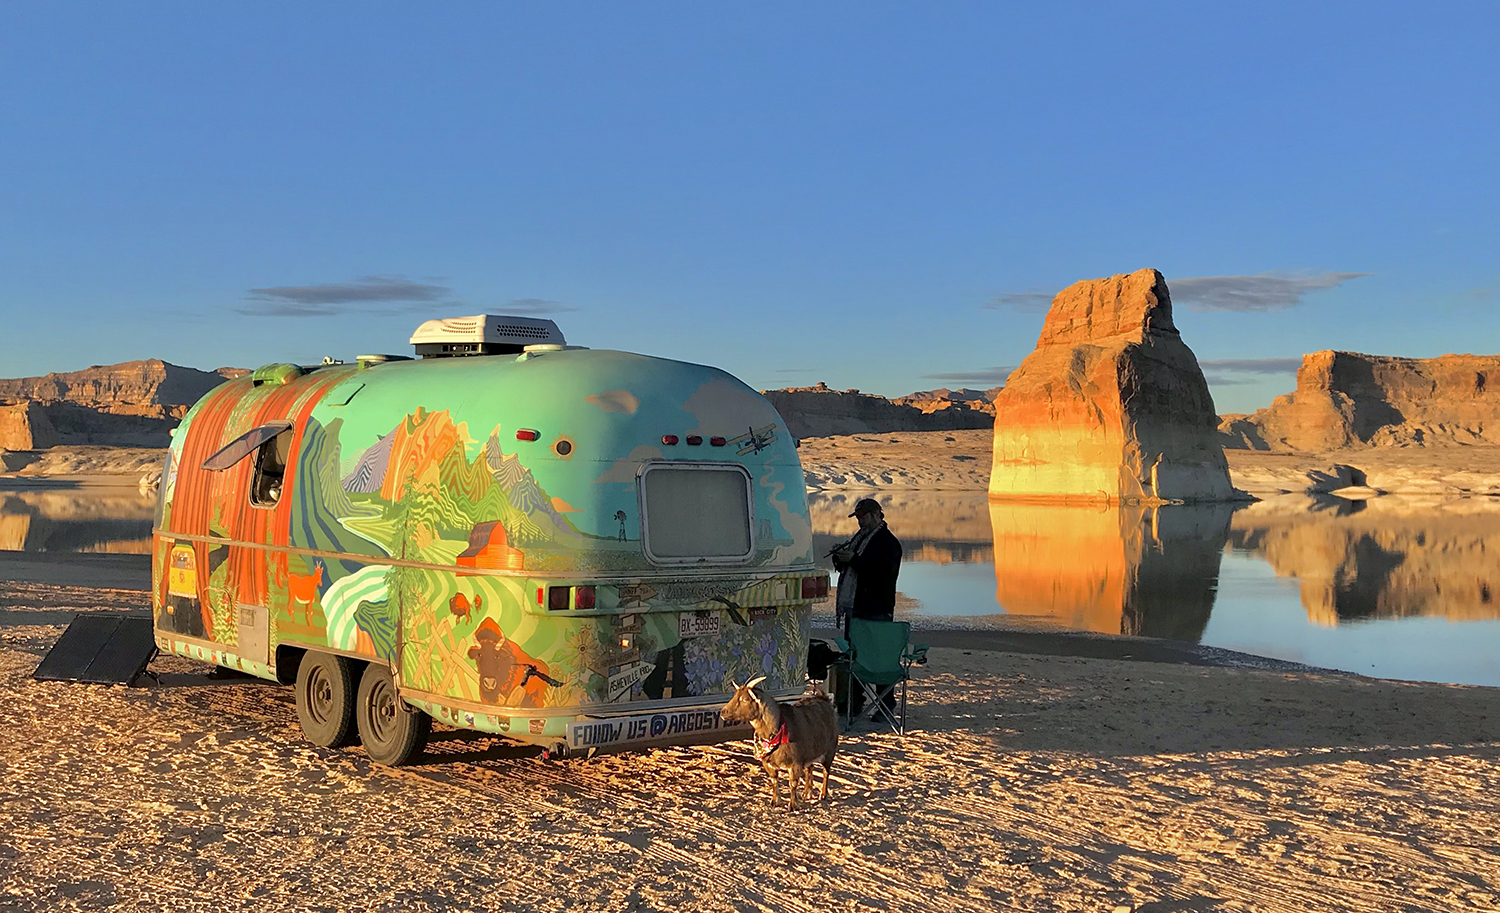 A colorful RV parked on a desert lakeshore.